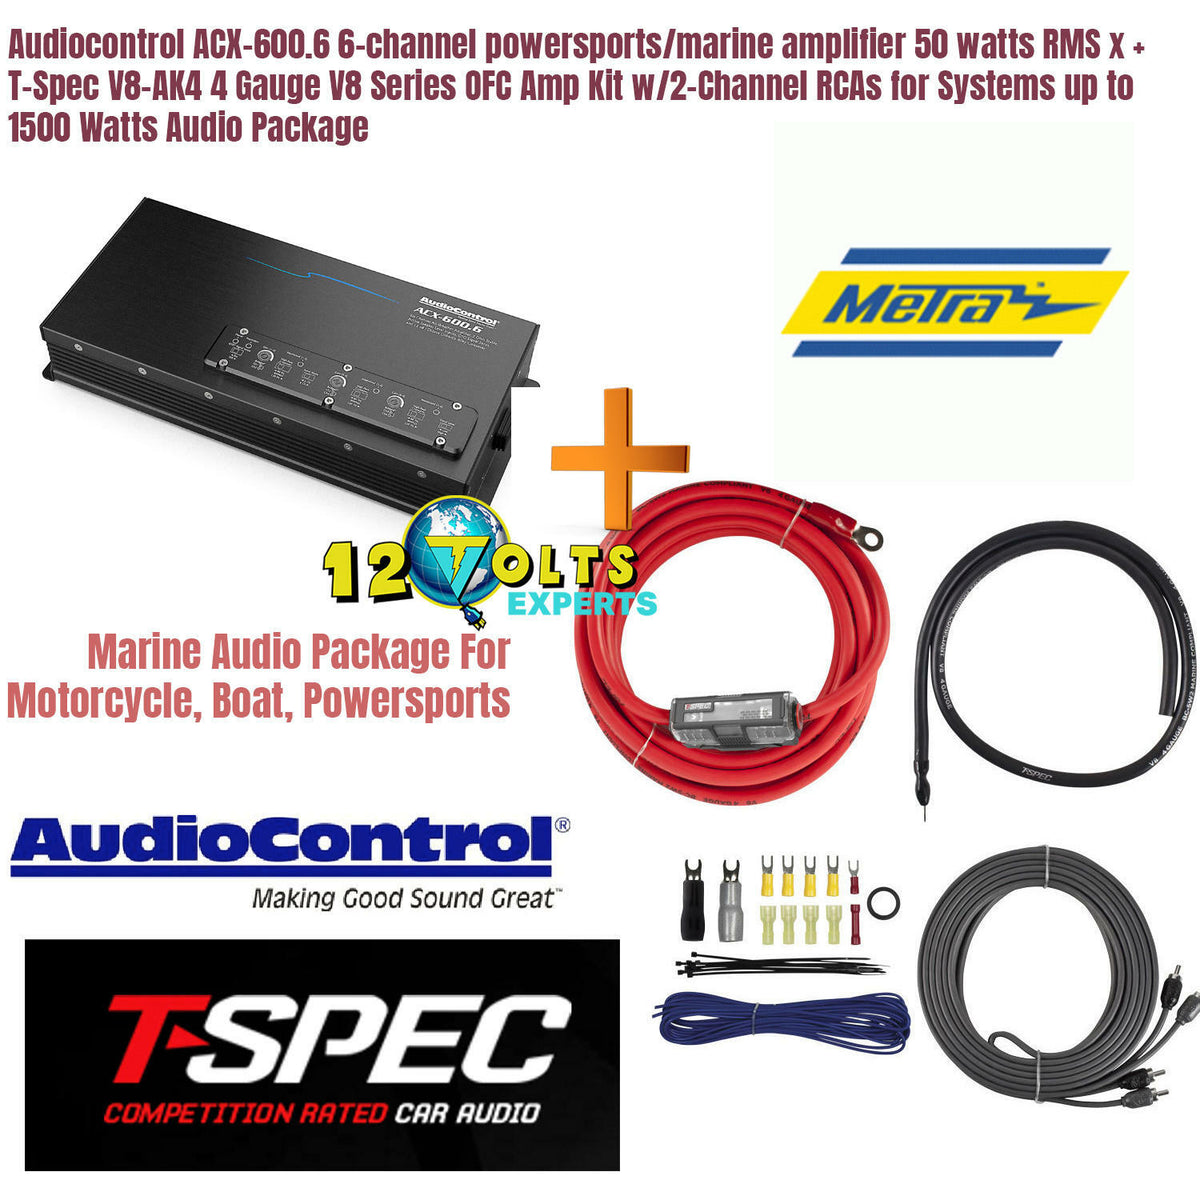 Audiocontrol ACX-600.6 6-channel powersports/marine amplifier 50 watts RMS x + T-Spec V8-AK4 4 Gauge V8 Series OFC Amp Kit w/2-Channel RCAs for Systems up to 1500 Watts Audio Package